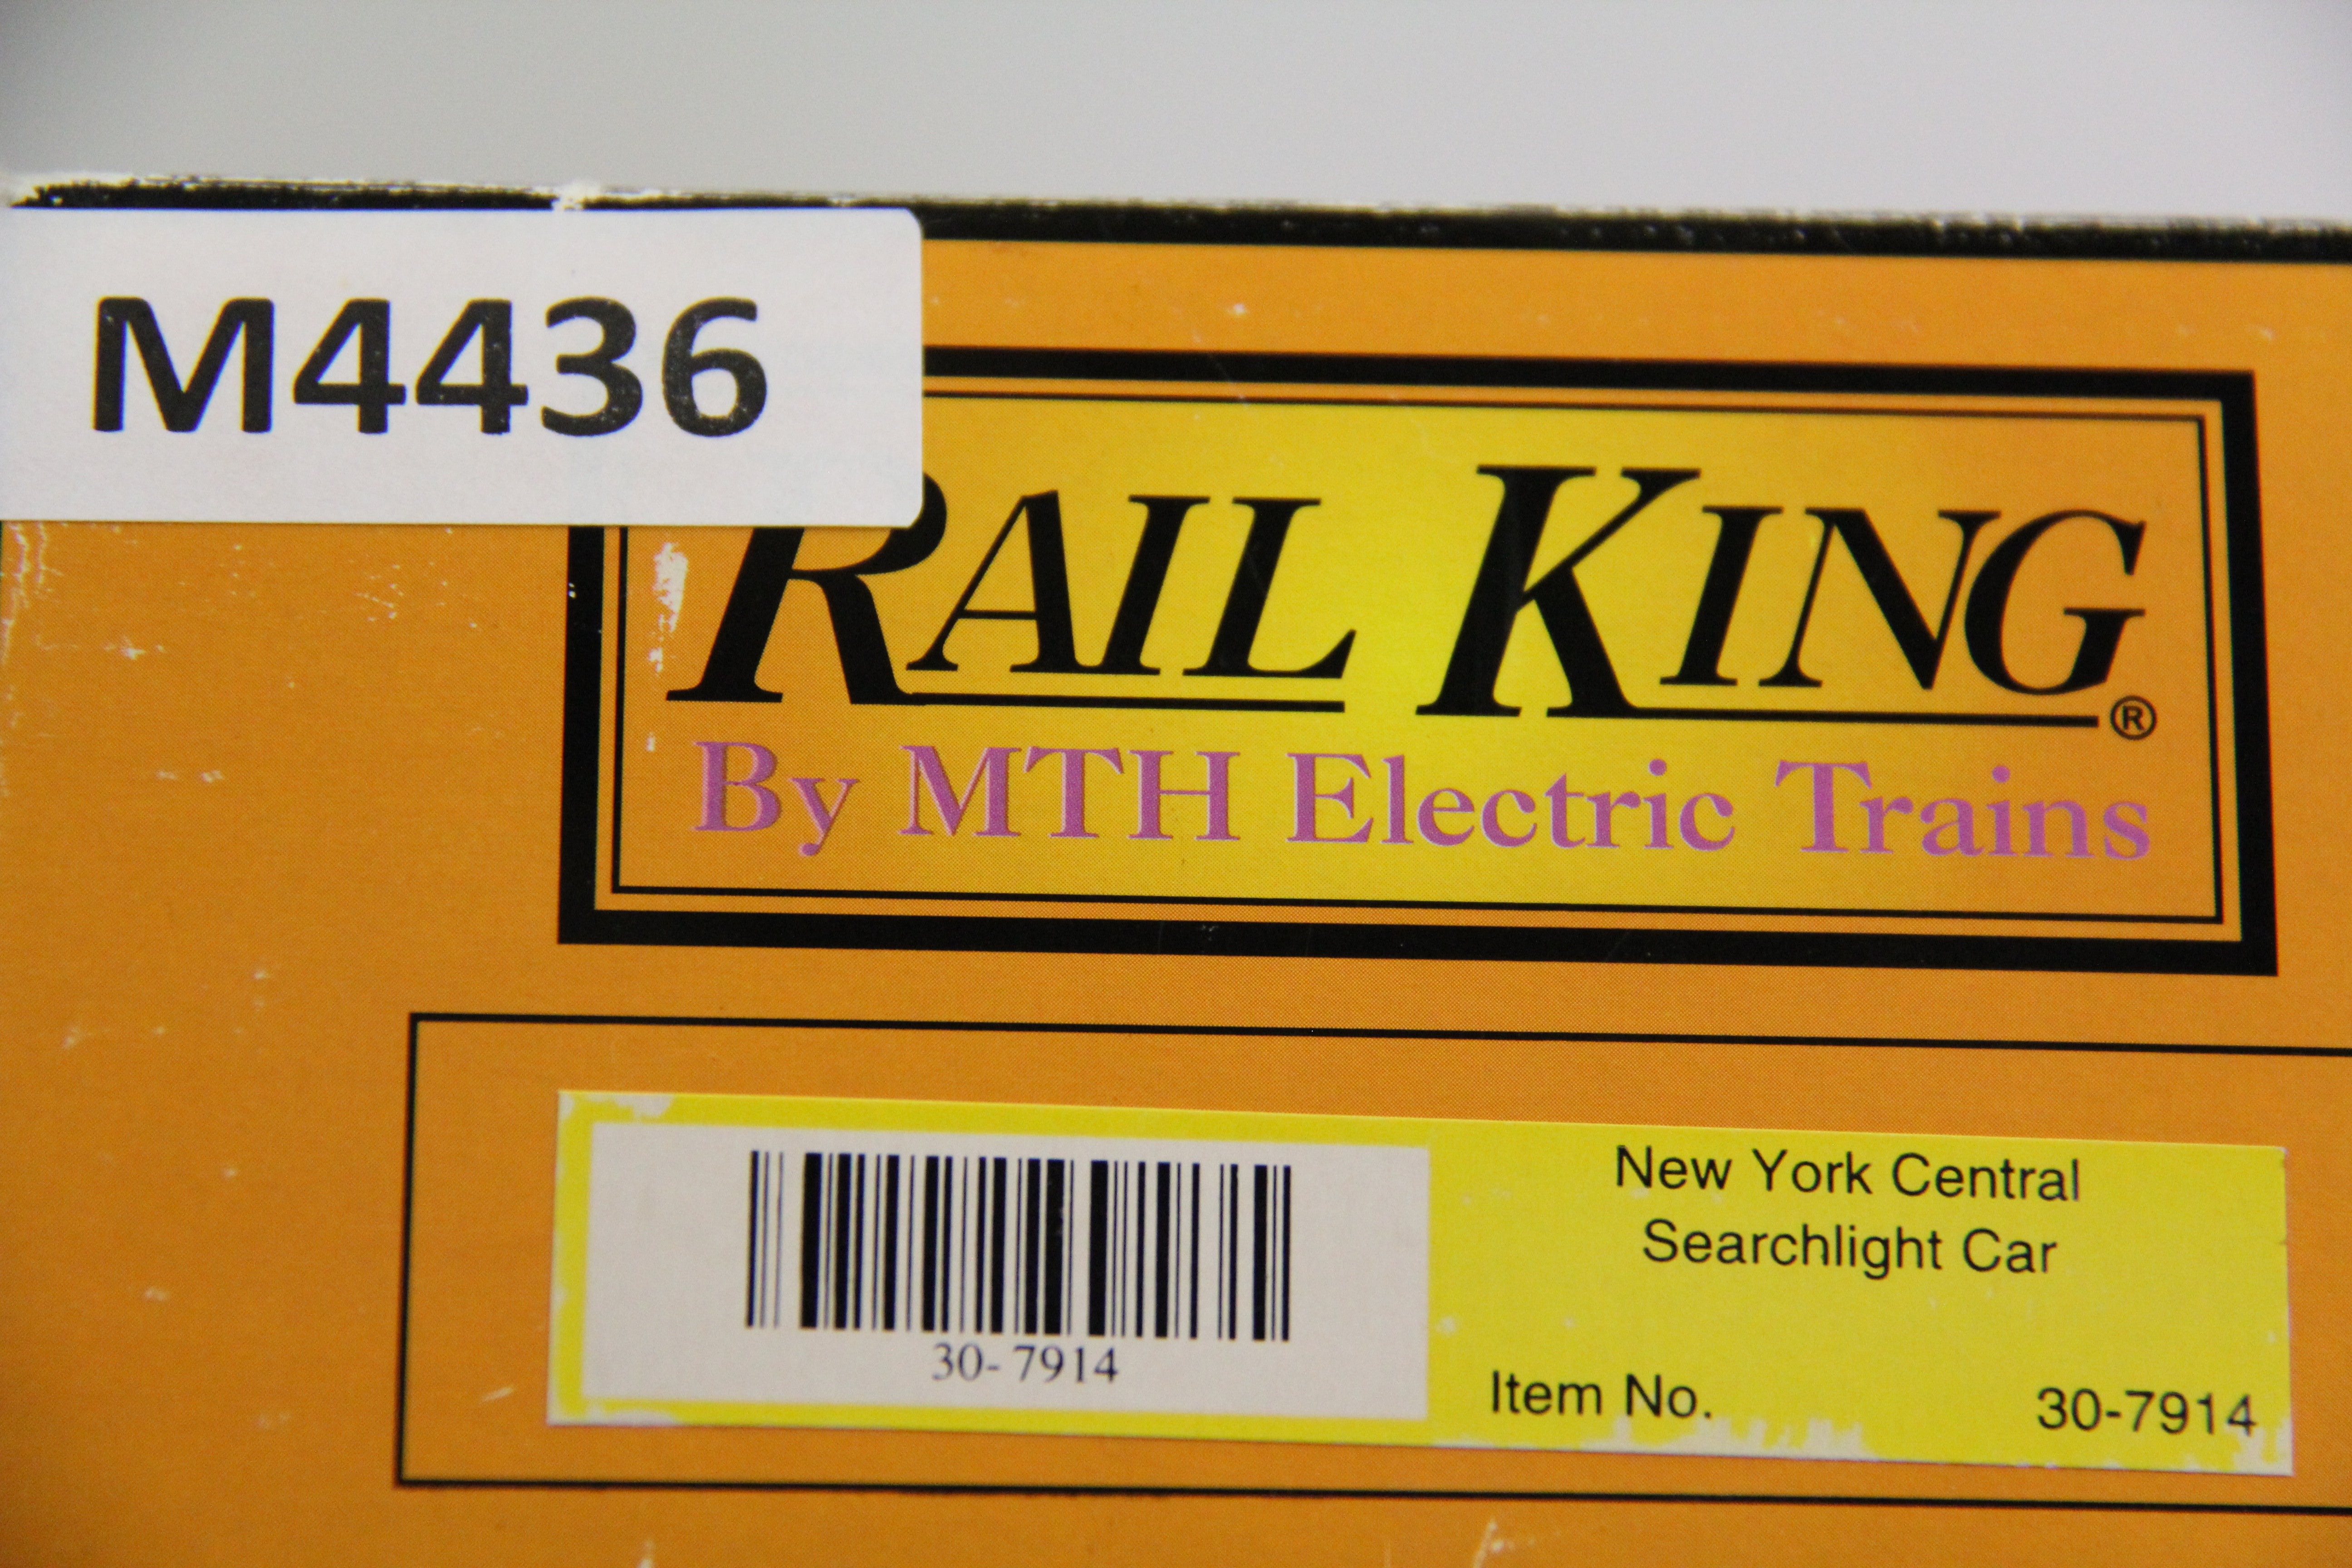 Rail King 30-7914 New York Central Searchlight Car-Second hand-M4436